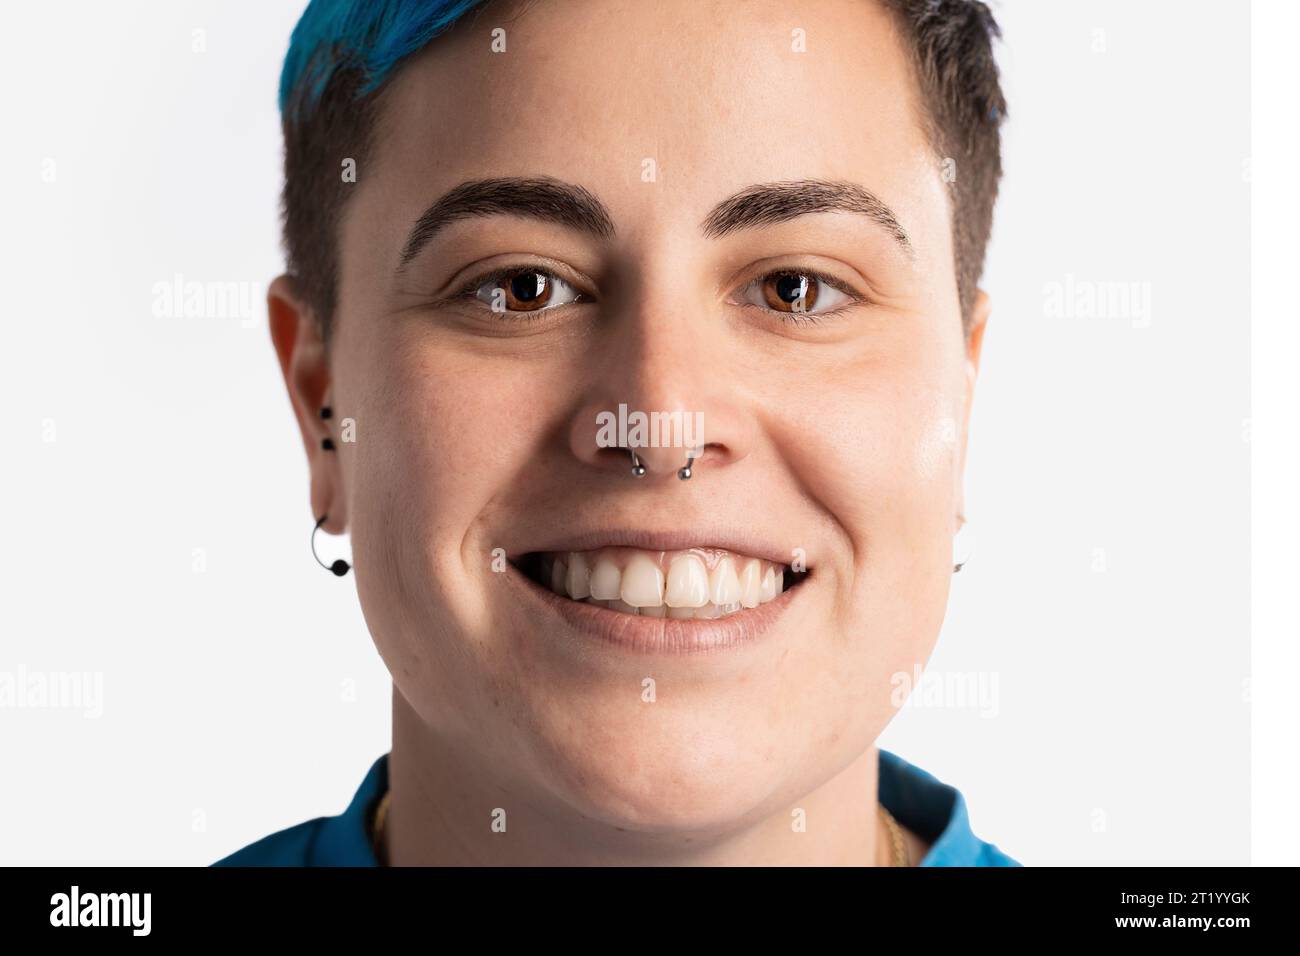 Close-up portrait of a smiling gender fluid woman, showcasing her androgynous features. She has vibrant blue short hair, a nose piercing, and an earri Stock Photo